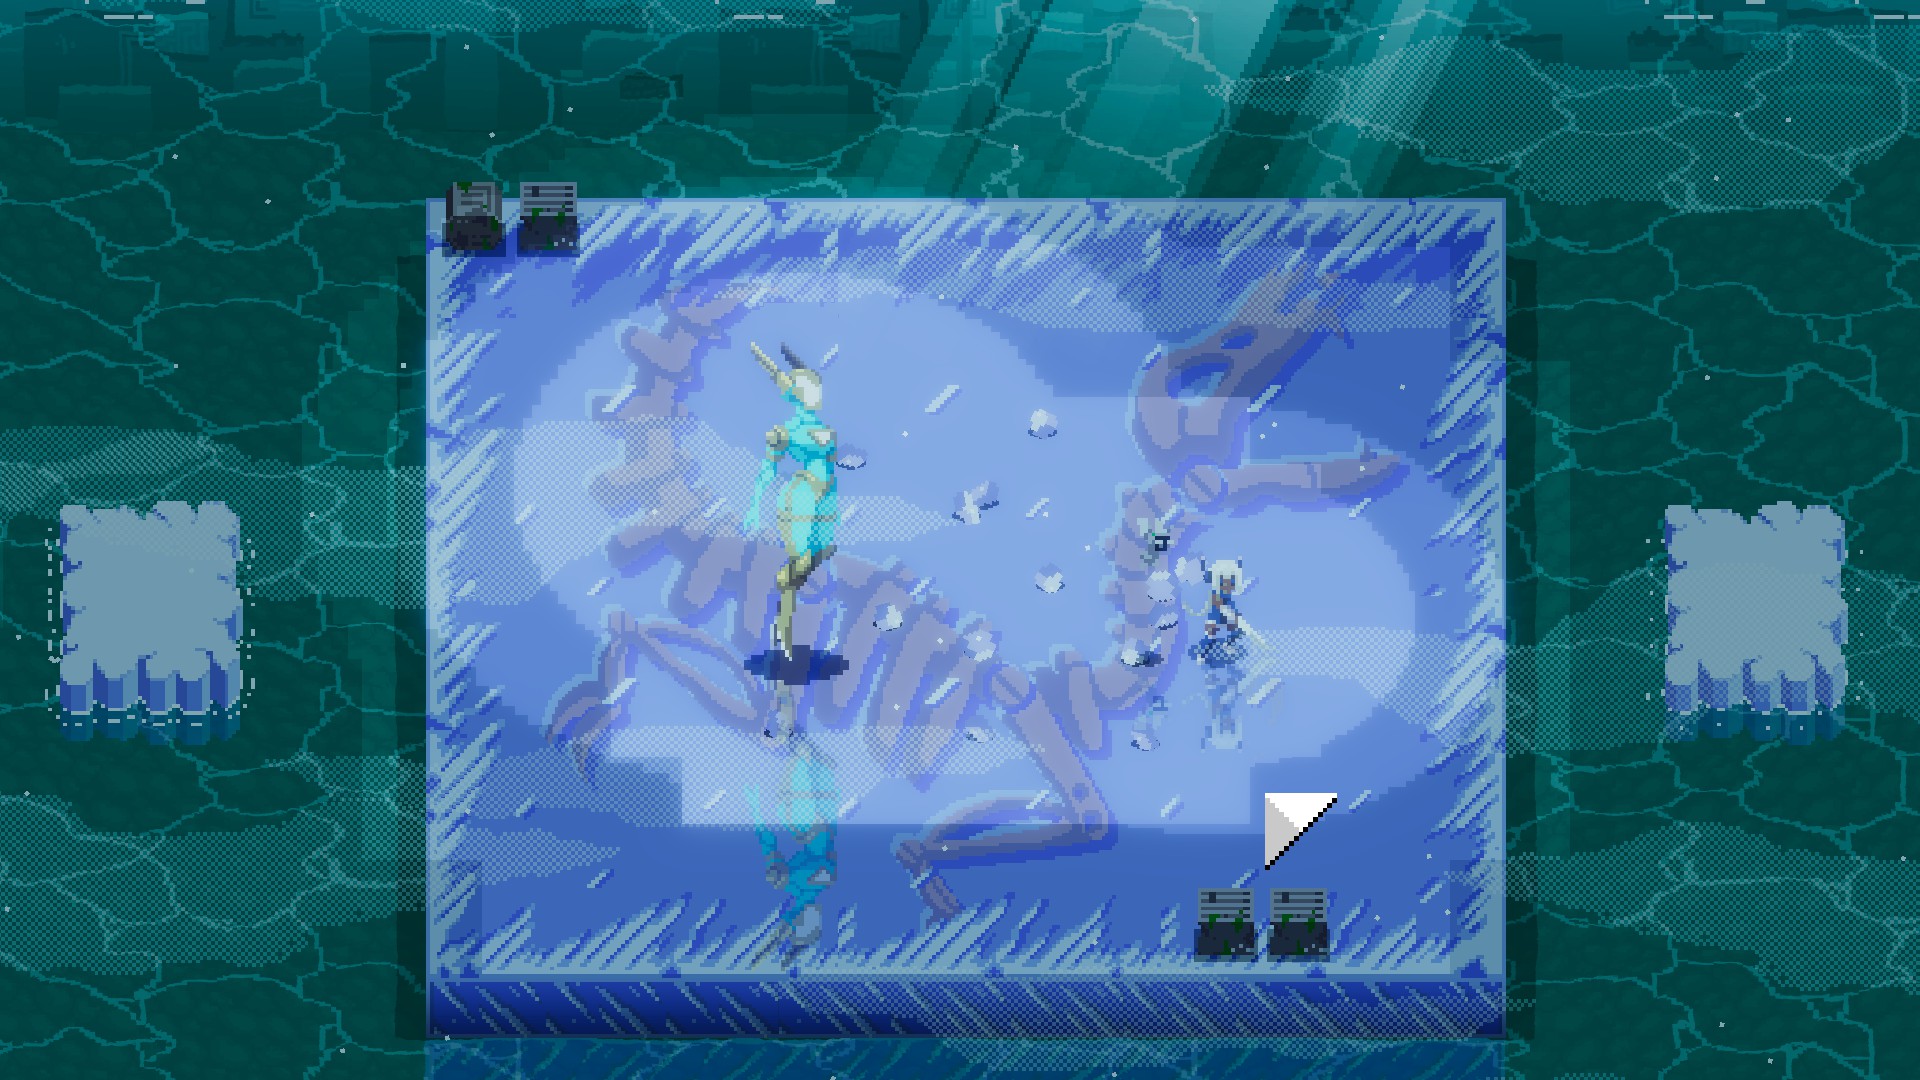 Facing off against a boss on a platform made of ice